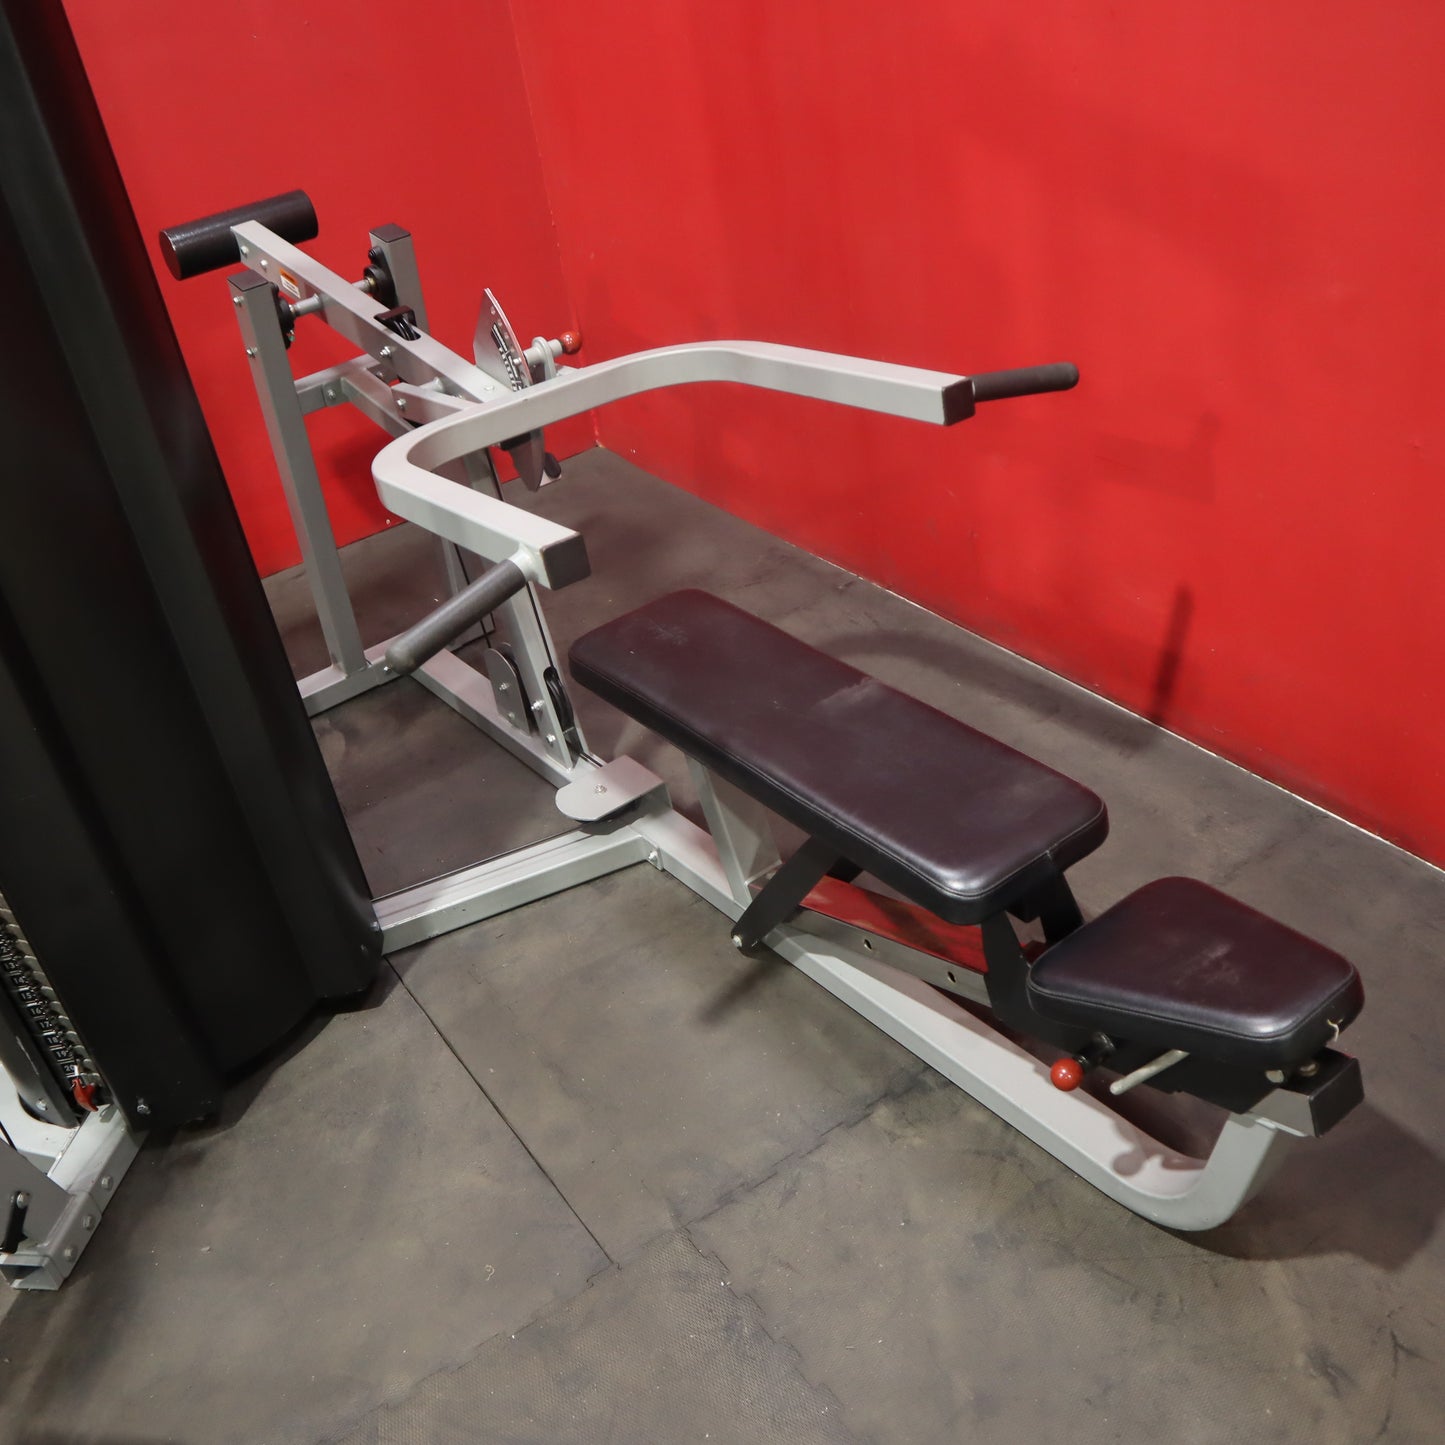 Life Fitness Fit 3 Series Multi-Gym (Used)